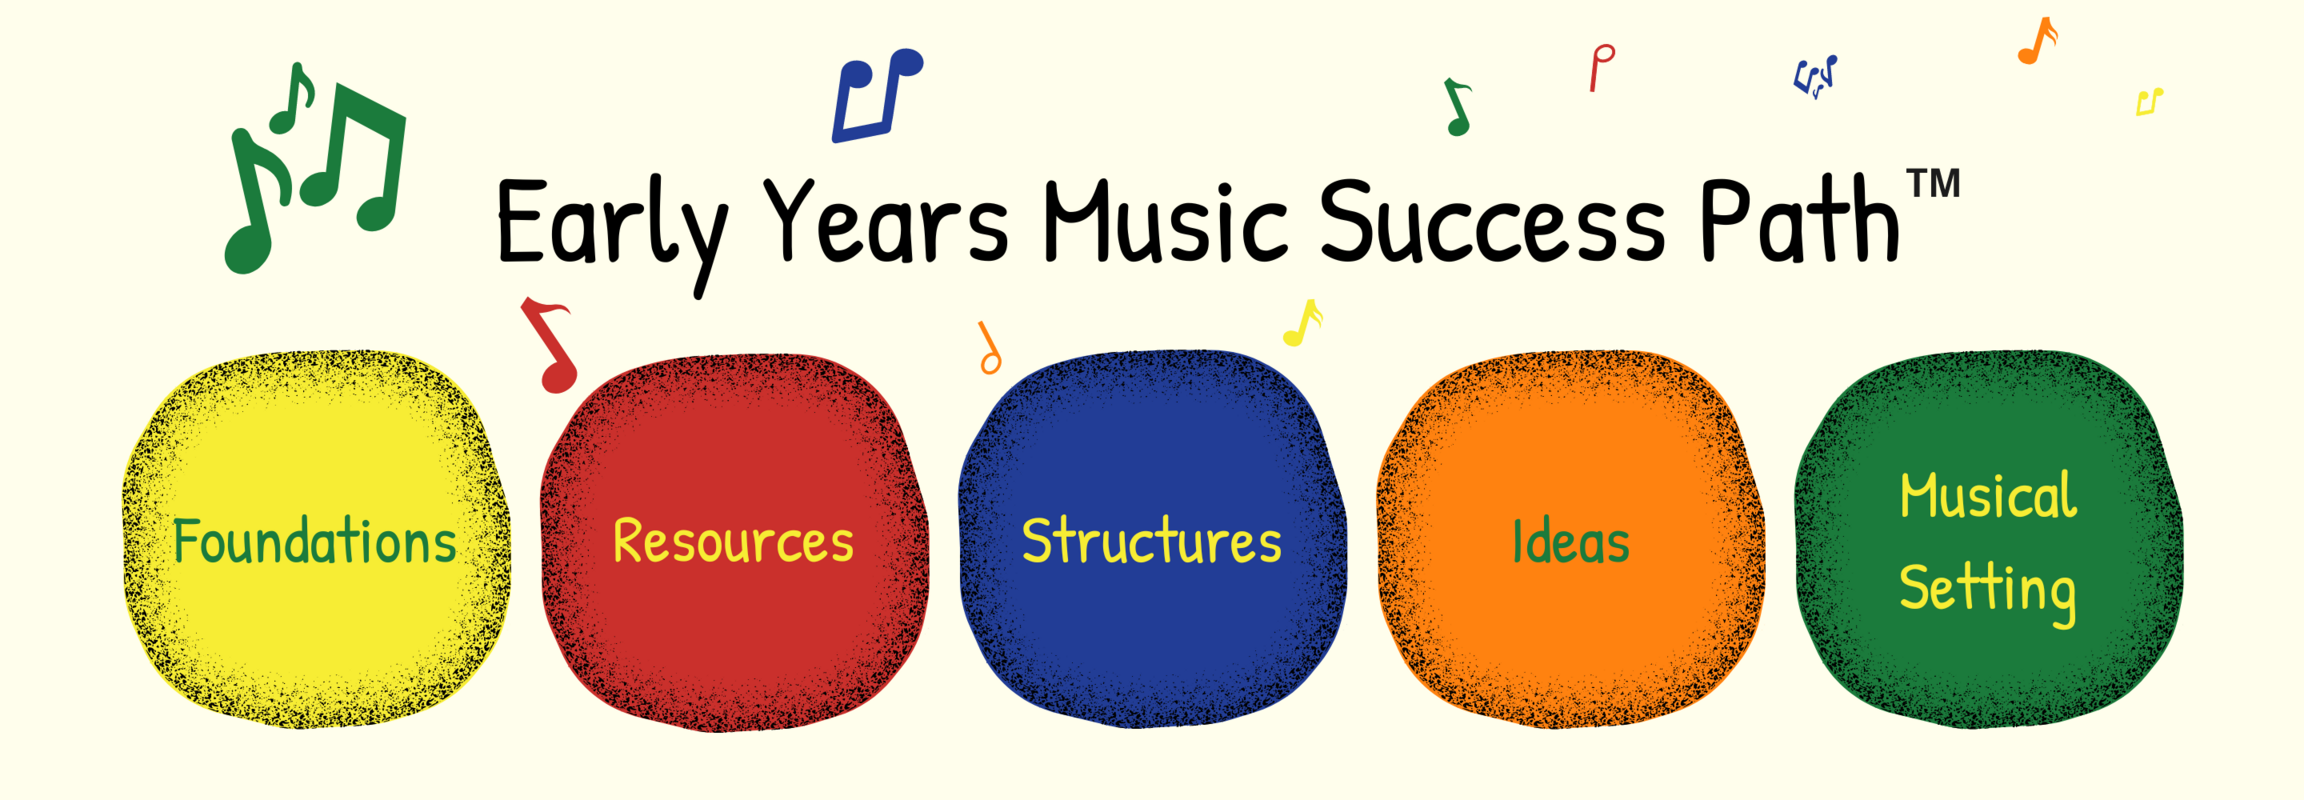 Early Years Music Success Path (2880 × 1000px) (2)